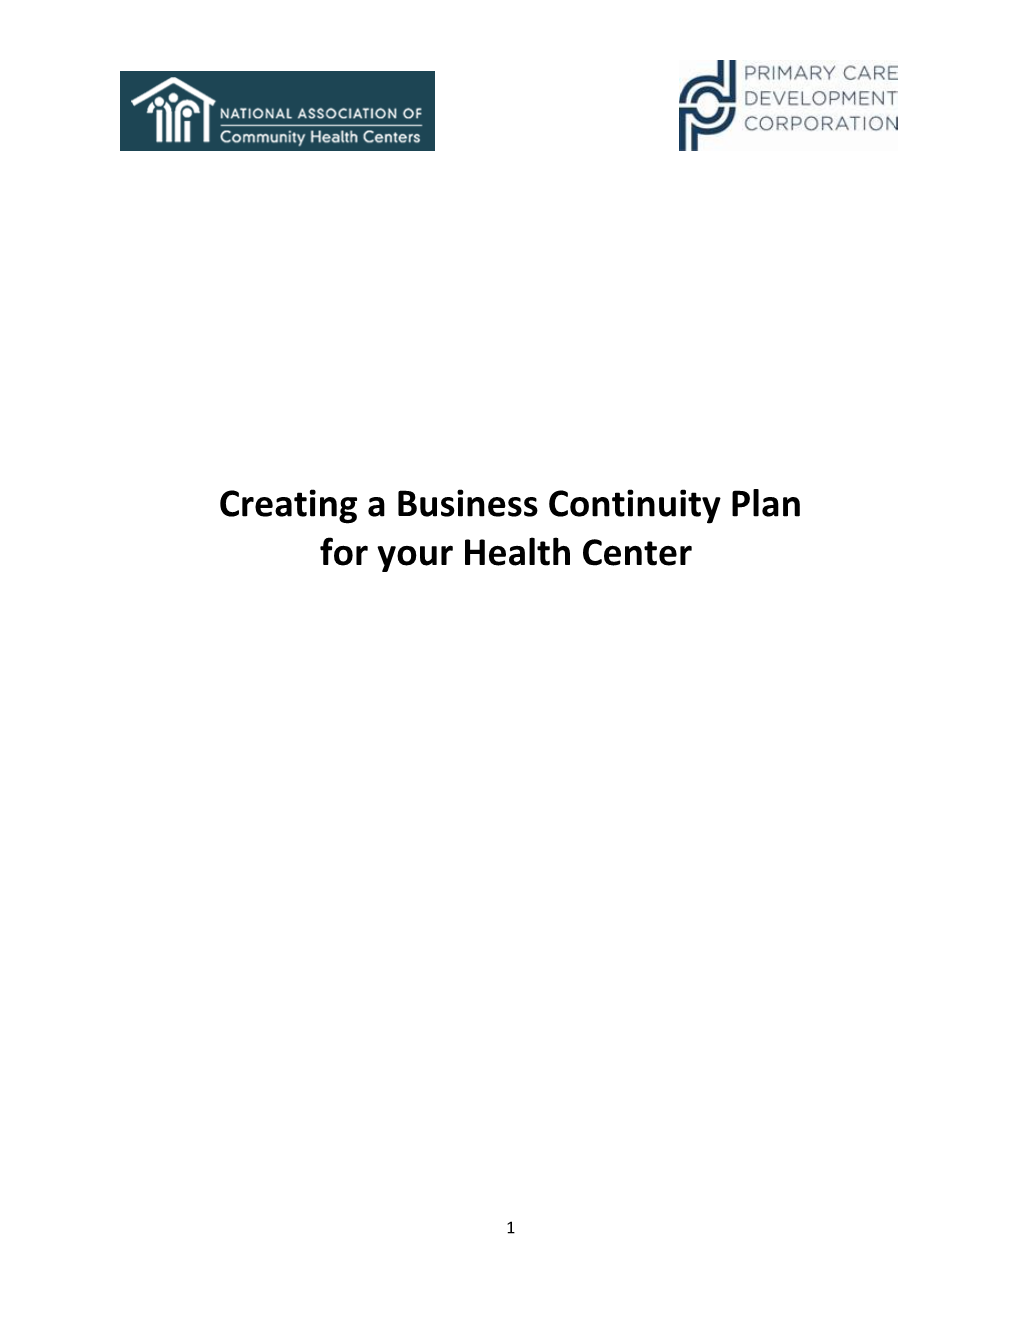 Creating a Business Continuity Plan